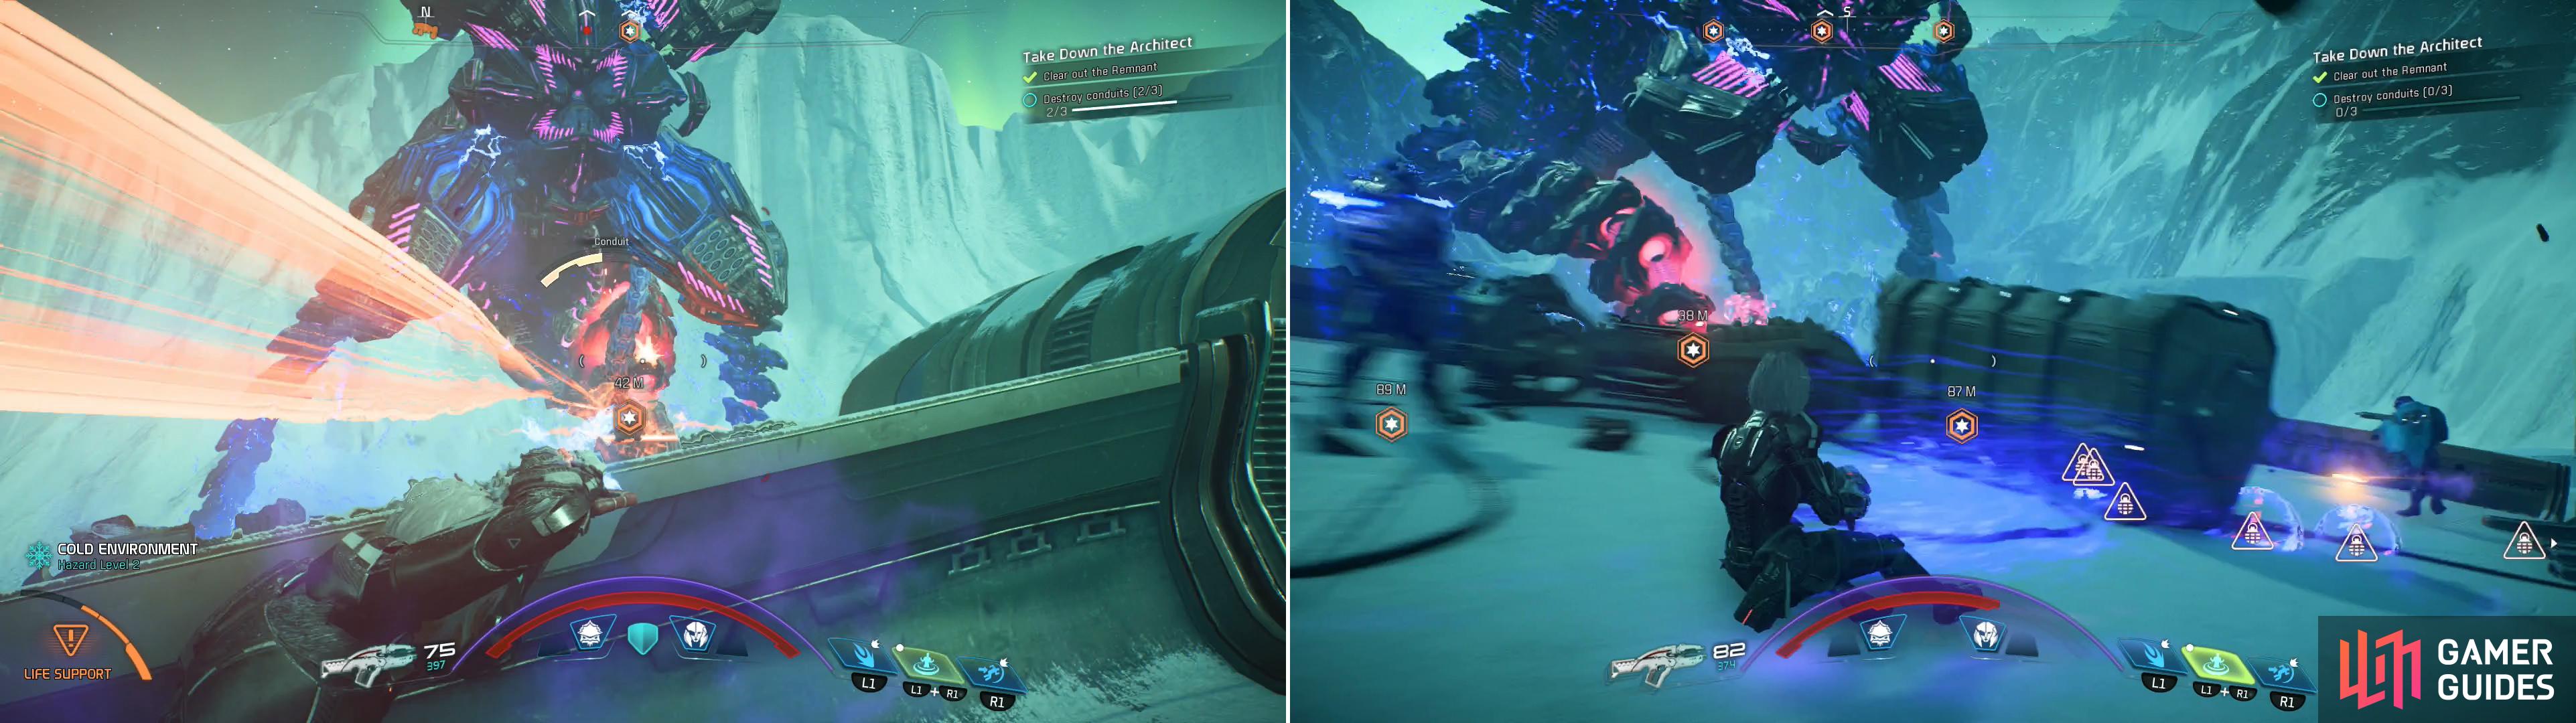 Stay in cover to avoid the Architect's rapid-fire laser attack (left) and stay mobile to avoid its mines (right).